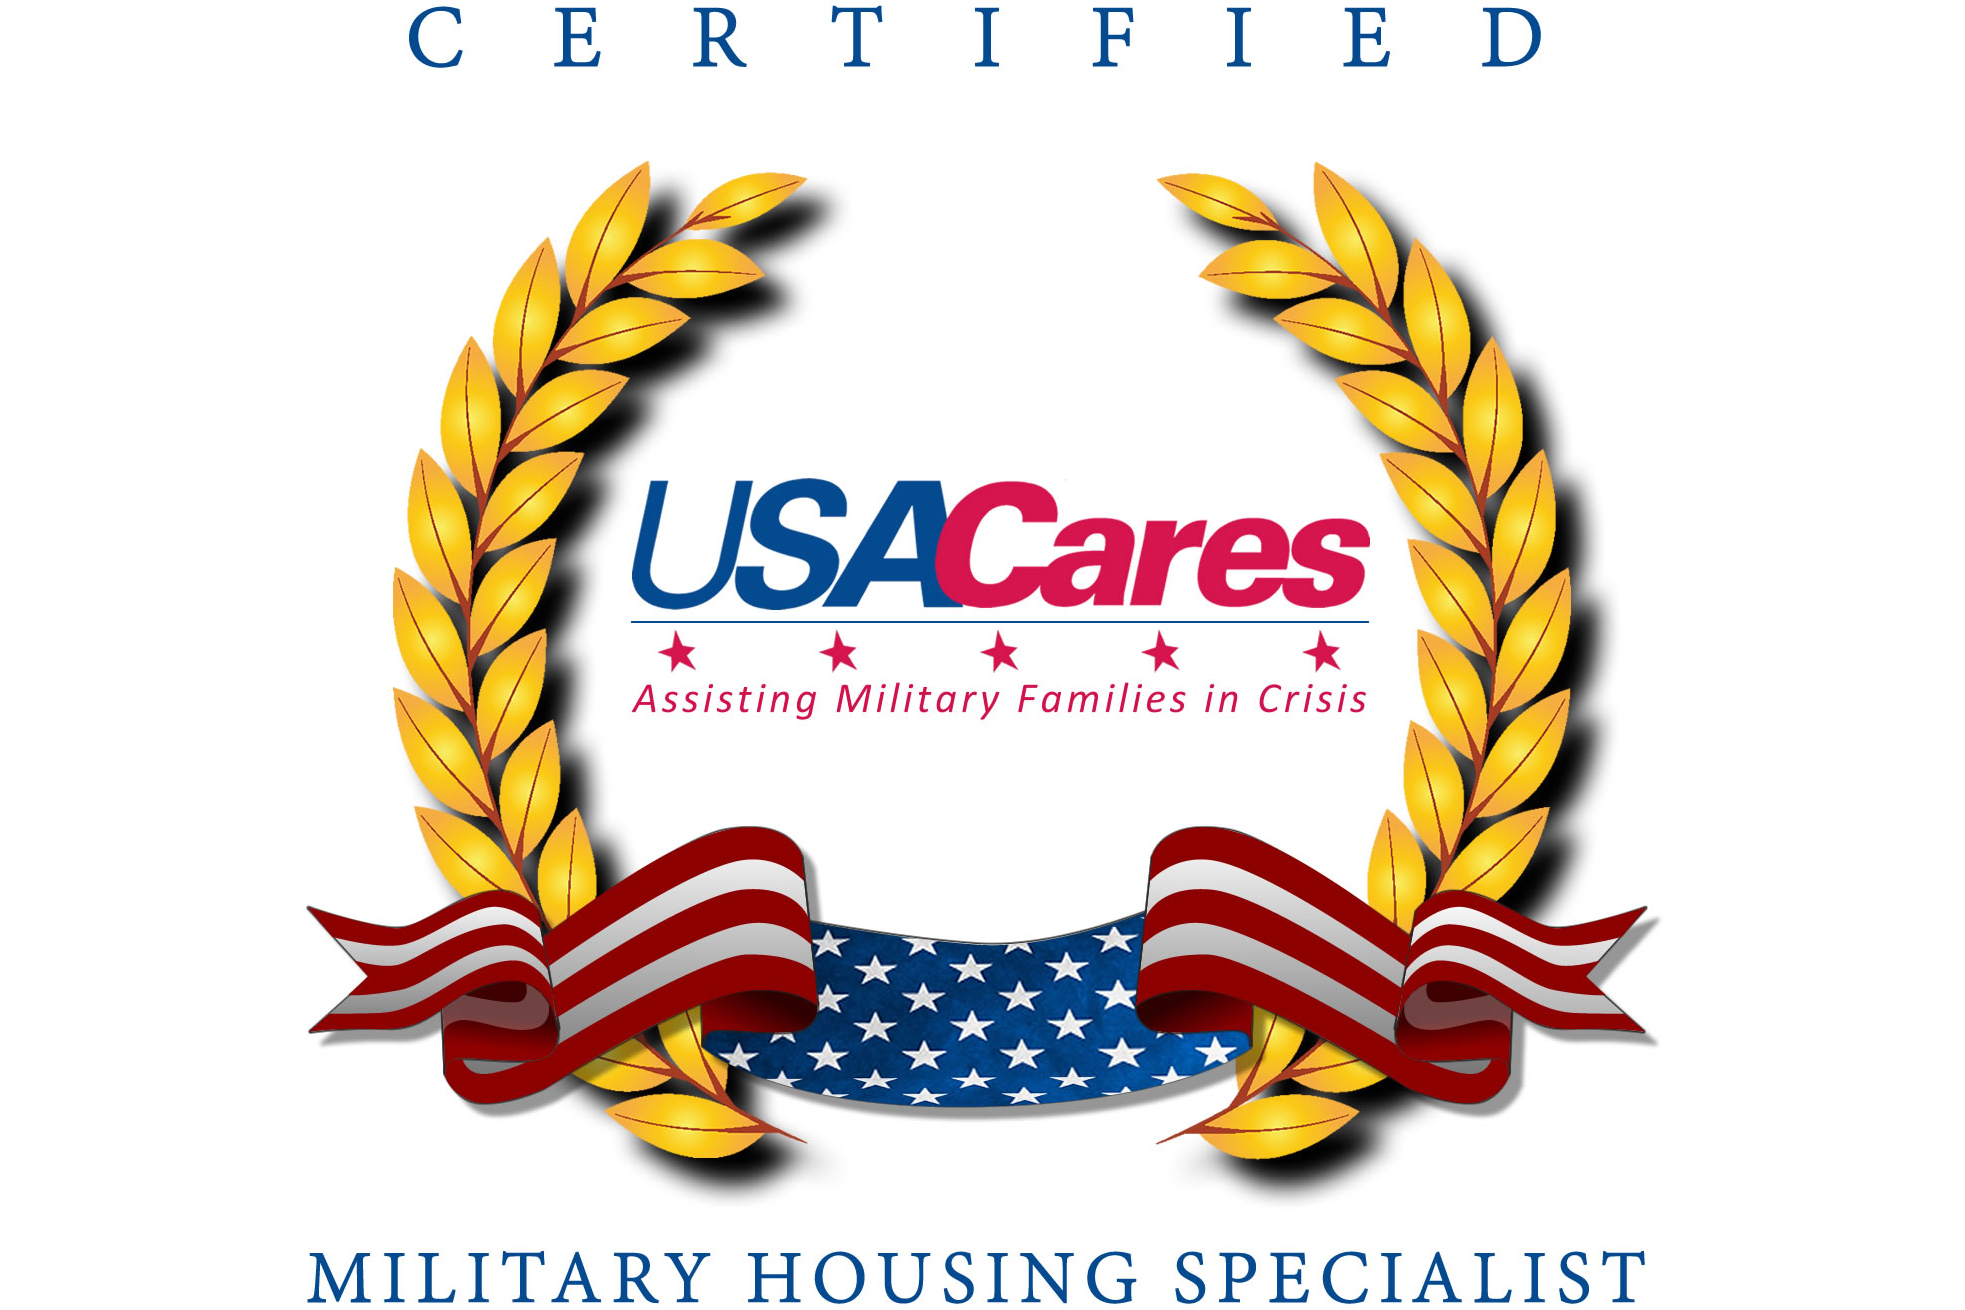 Certified Military Housing Specialist